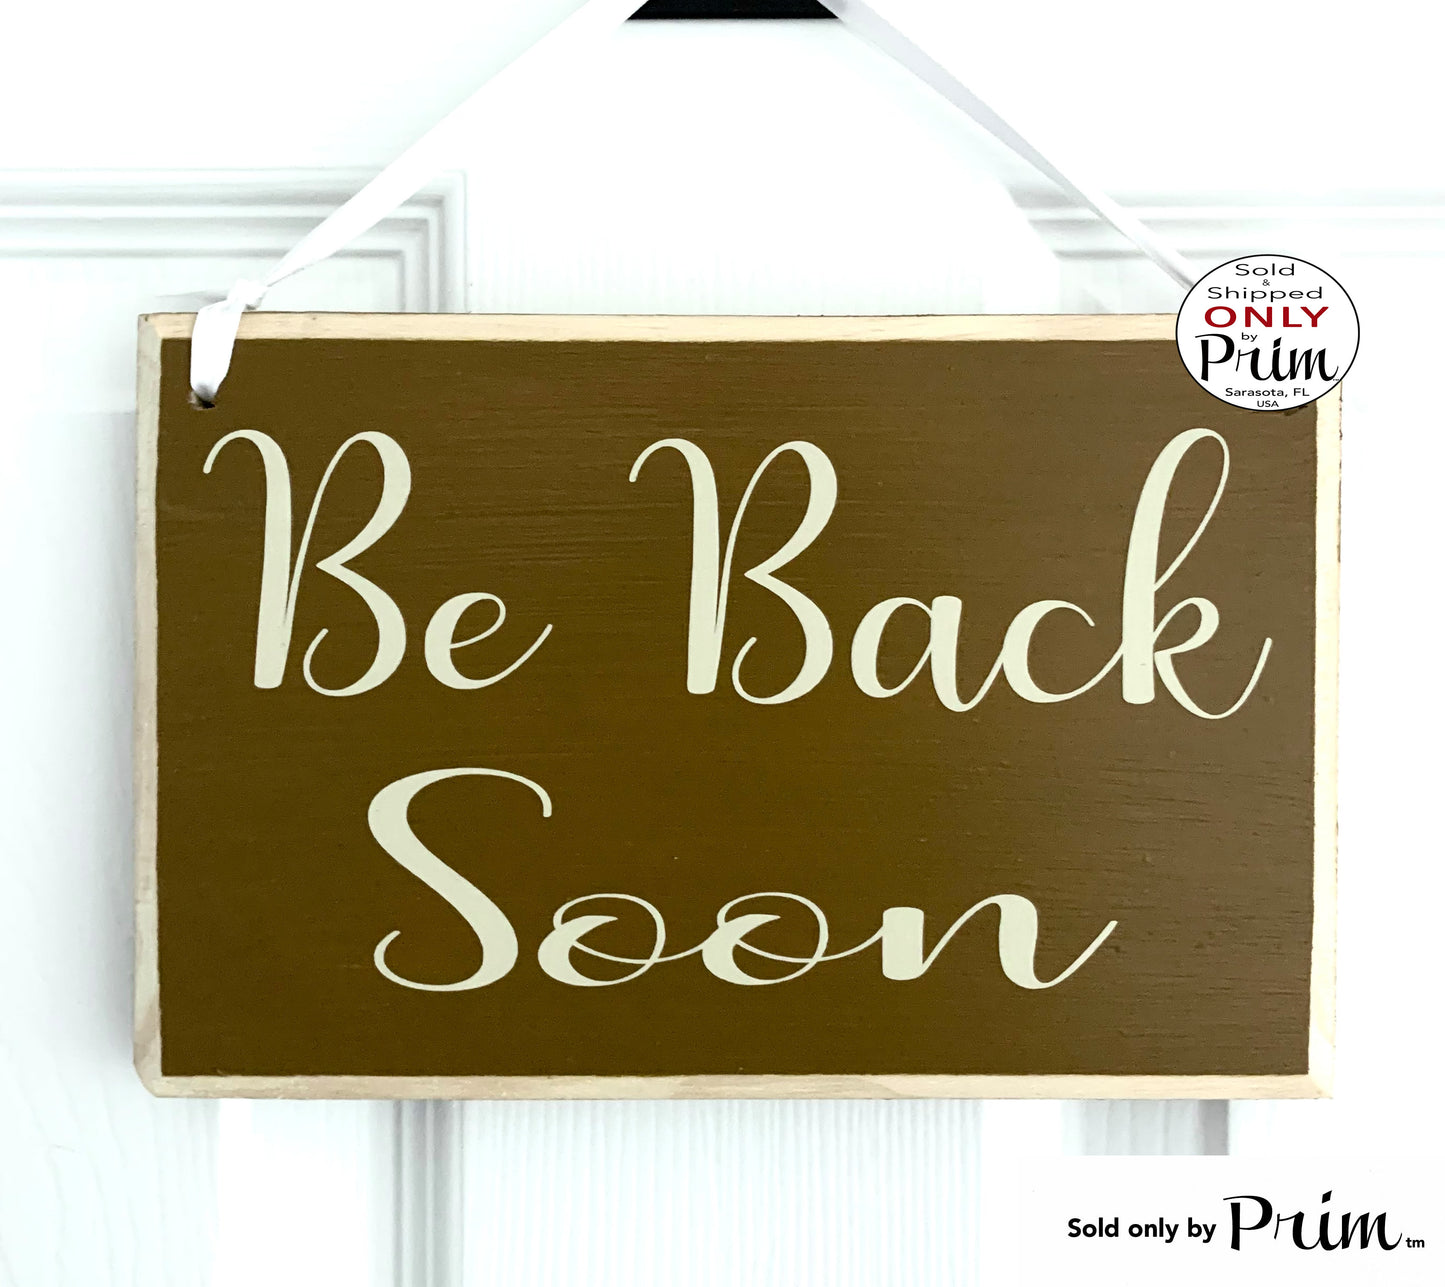 Designs by Prim 8x6 Be Back Soon Custom Wood Sign I'll We'll Be Right Back Closed Come Shortly Please Wait Unavailable Office Business Door Hanger Plaque